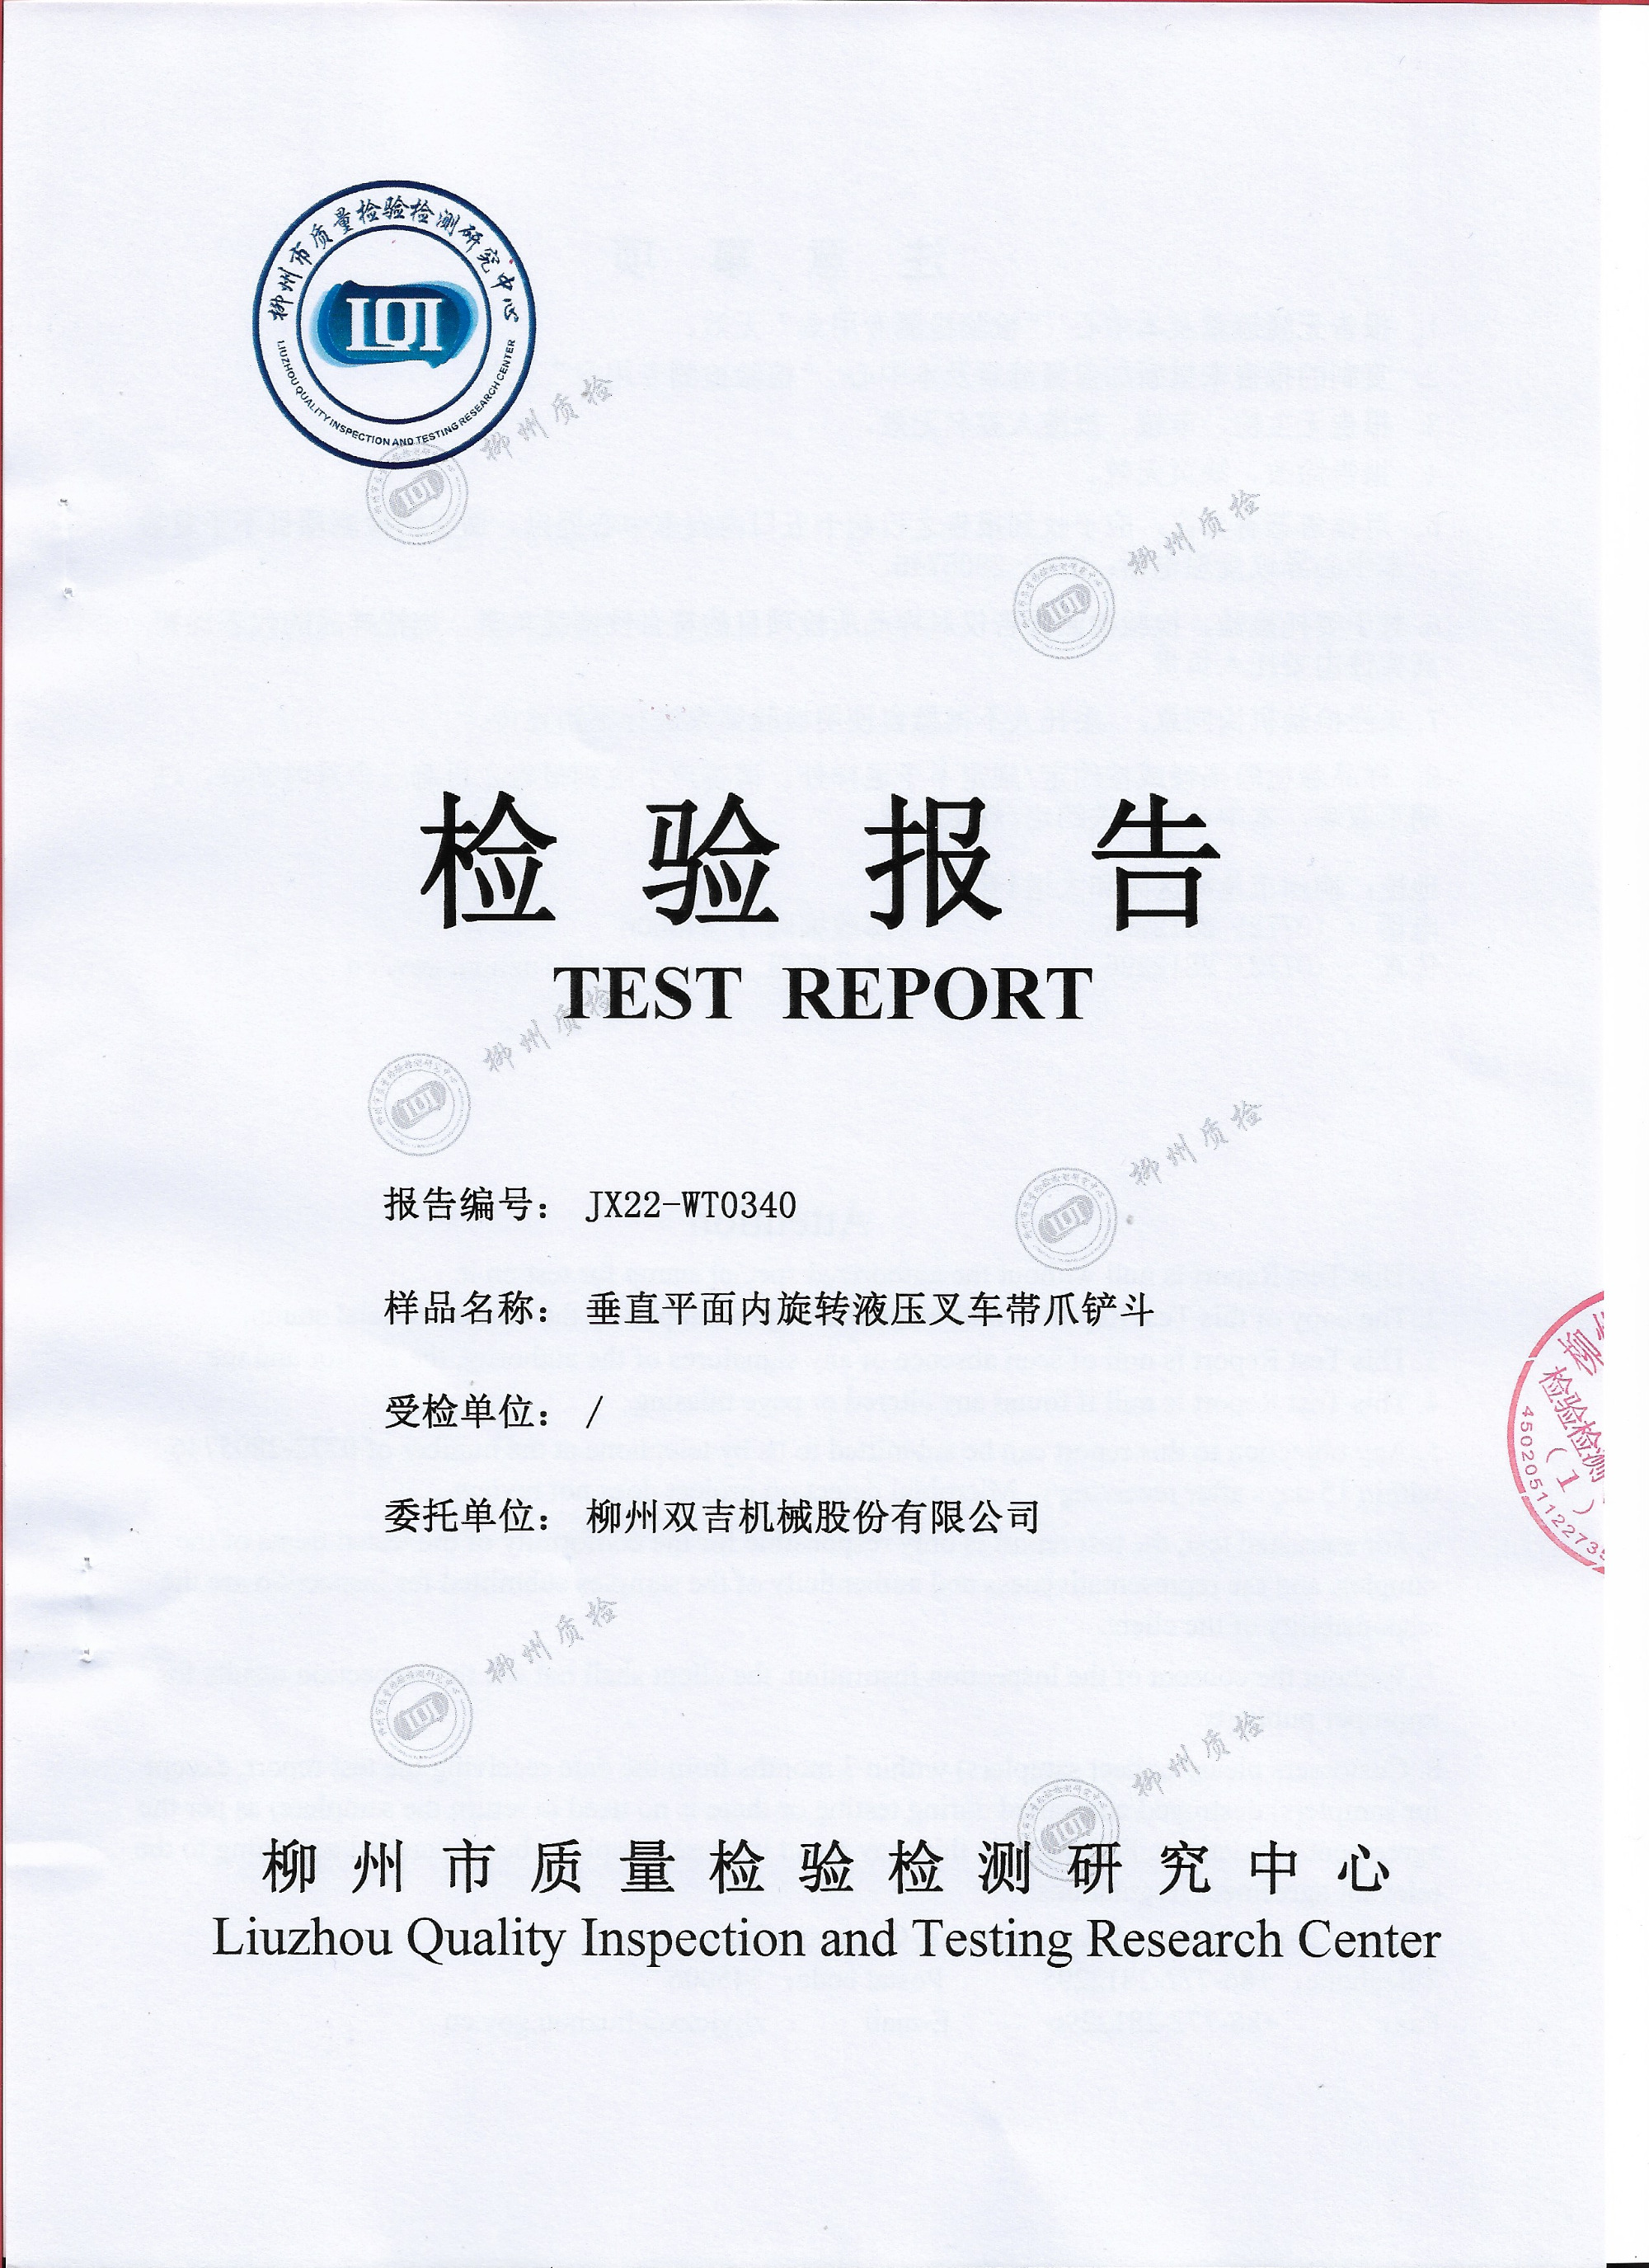 Forklift accessories quality inspection report